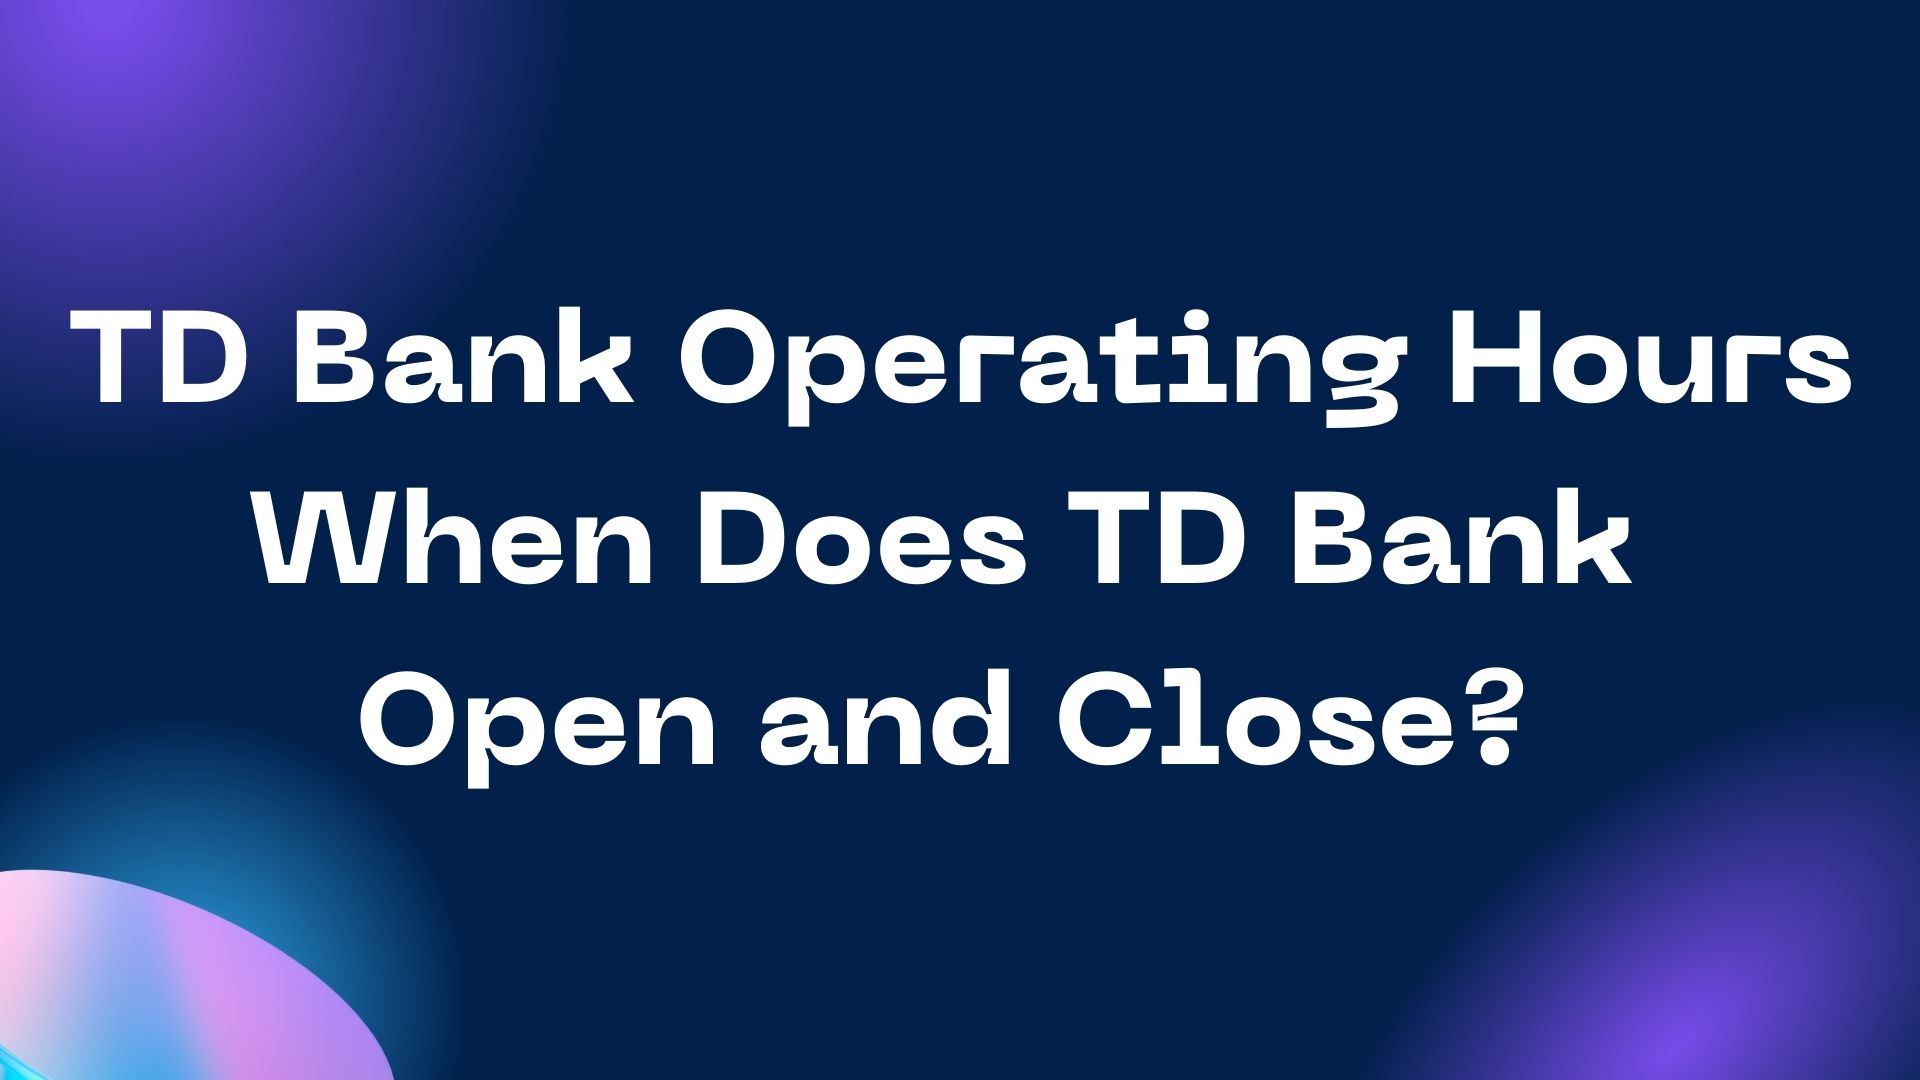 TD Bank Operating Hours: When Does TD Bank Open and Close?